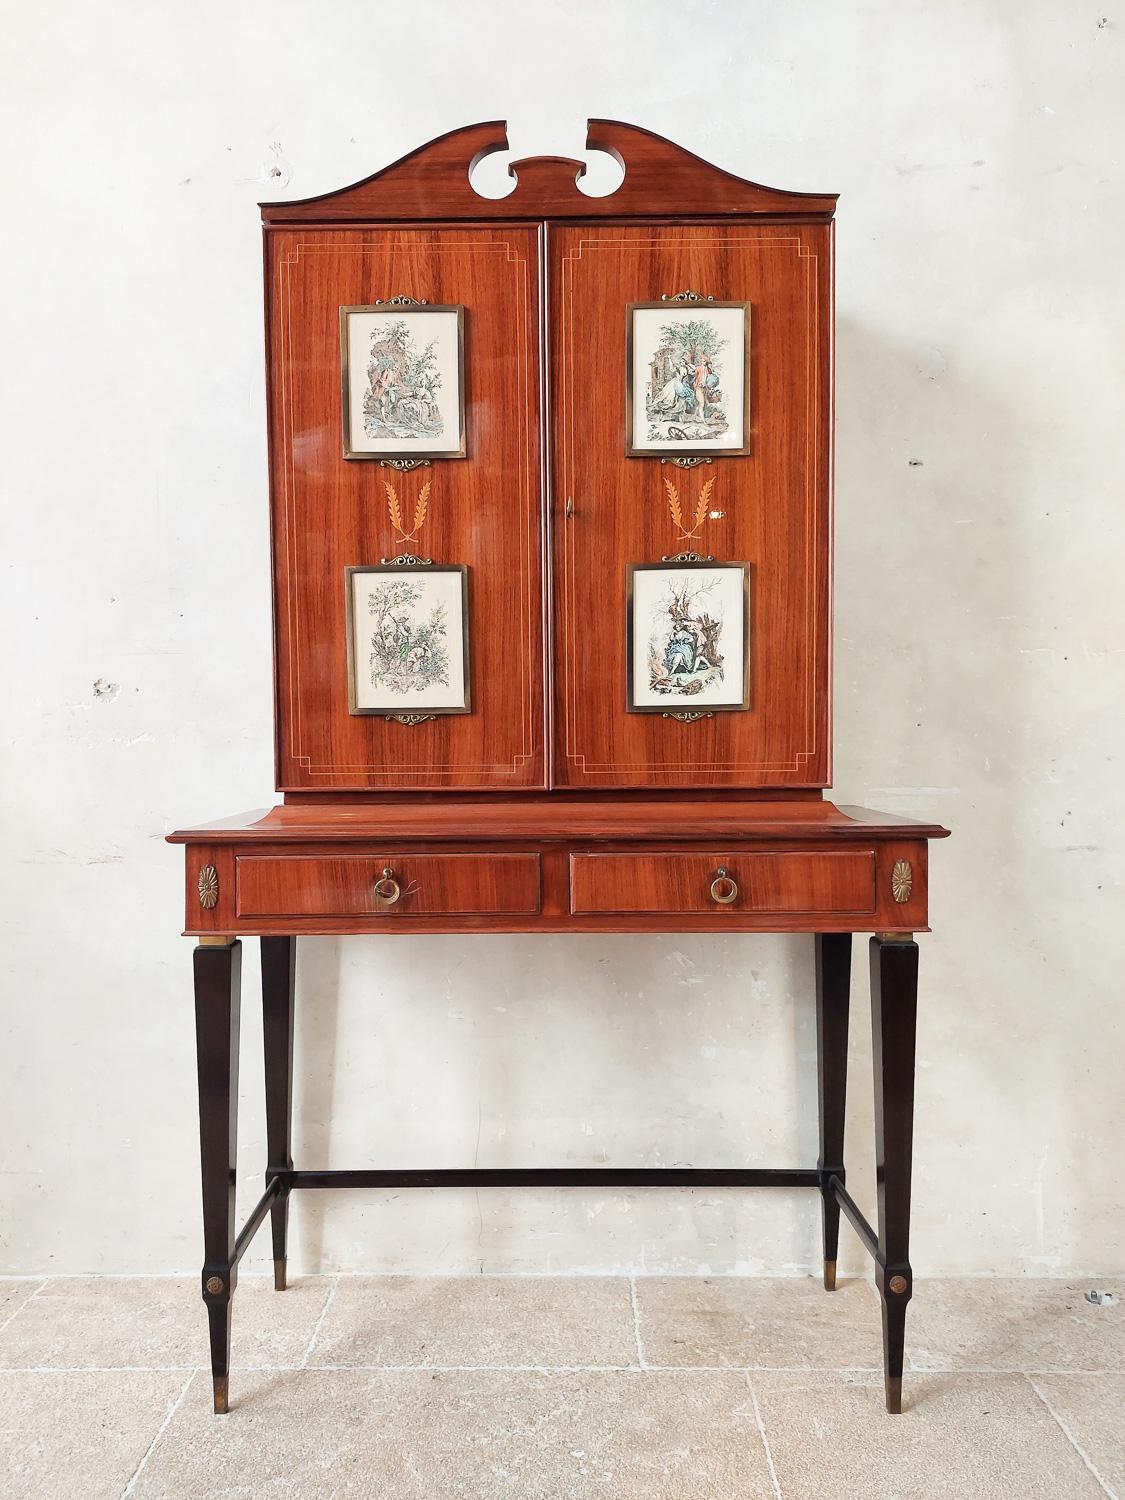 Belle Époque 1960s Italian Designer Drinks Cabinet, Inlaid and Decorated with Etchings For Sale